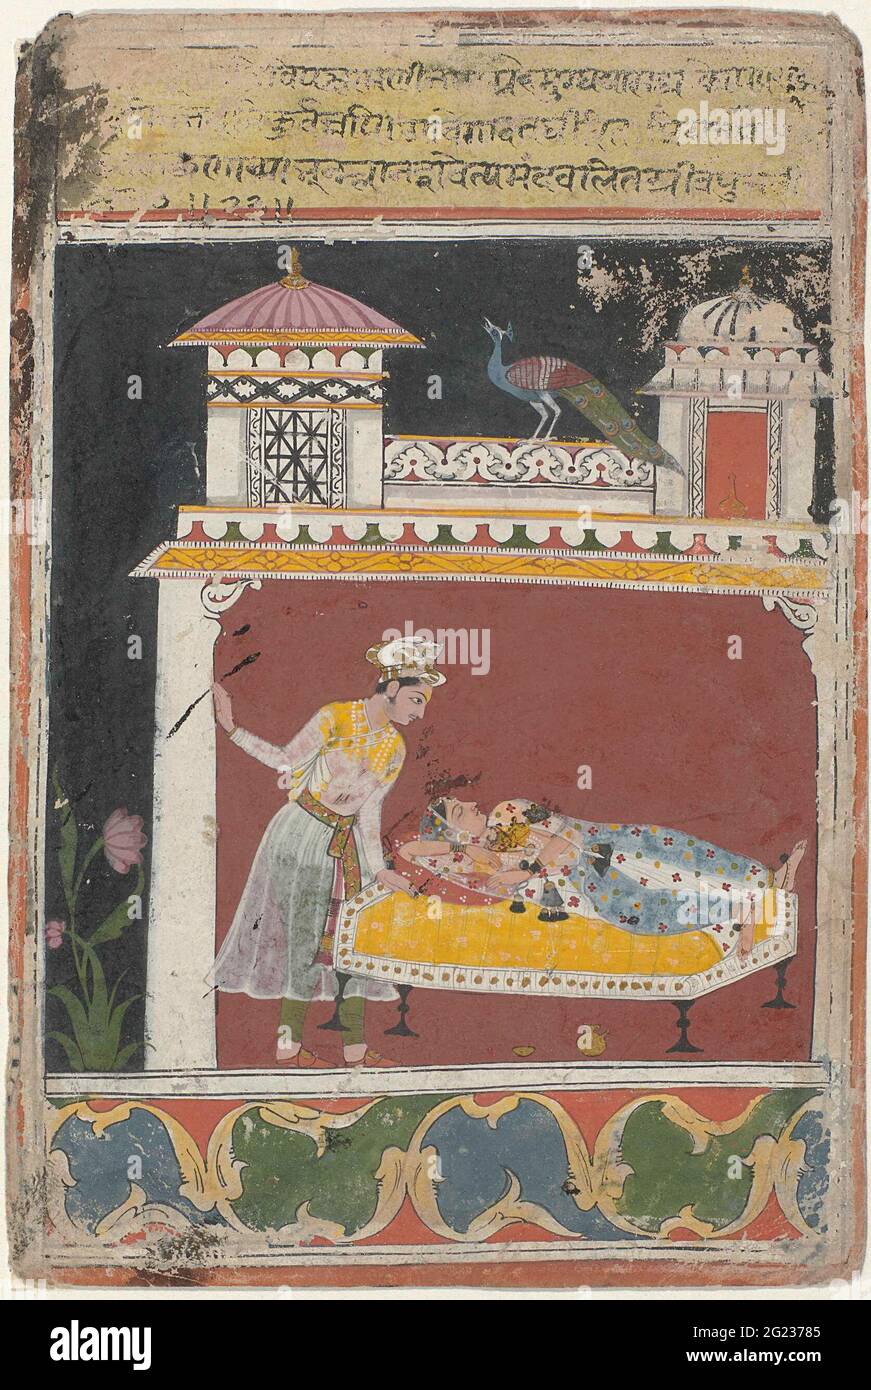 https://c8.alamy.com/comp/2G23785/lakta-ragini-a-prince-leaves-his-sleeping-loved-one-that-is-on-a-yellow-bed-on-the-roof-of-her-palace-is-a-peacock-down-the-show-a-wide-decorative-edge-of-a-swinging-yellow-border-around-blue-and-green-medallions-against-a-red-background-at-the-top-of-a-wide-yellow-edge-with-a-3-regular-inscription-in-former-indian-script-2G23785.jpg